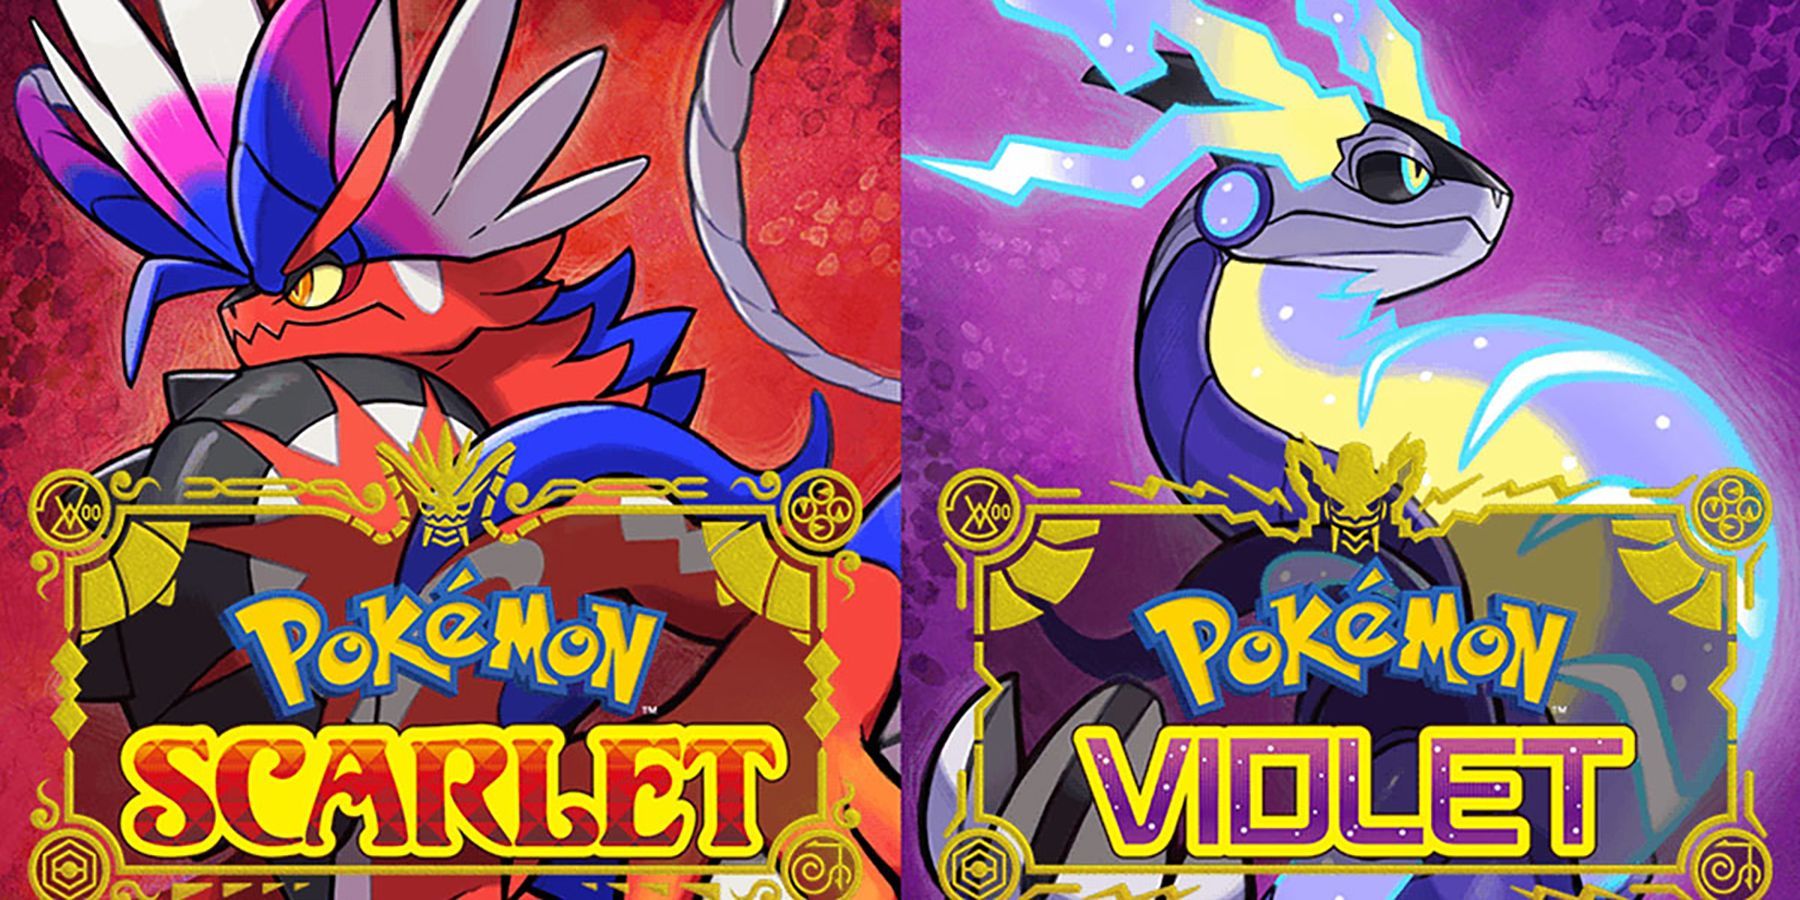 Pokemon Scarlet And Violet Introduces New Expansion Pass And Paradox Pokemon  - News - Nintendo World Report